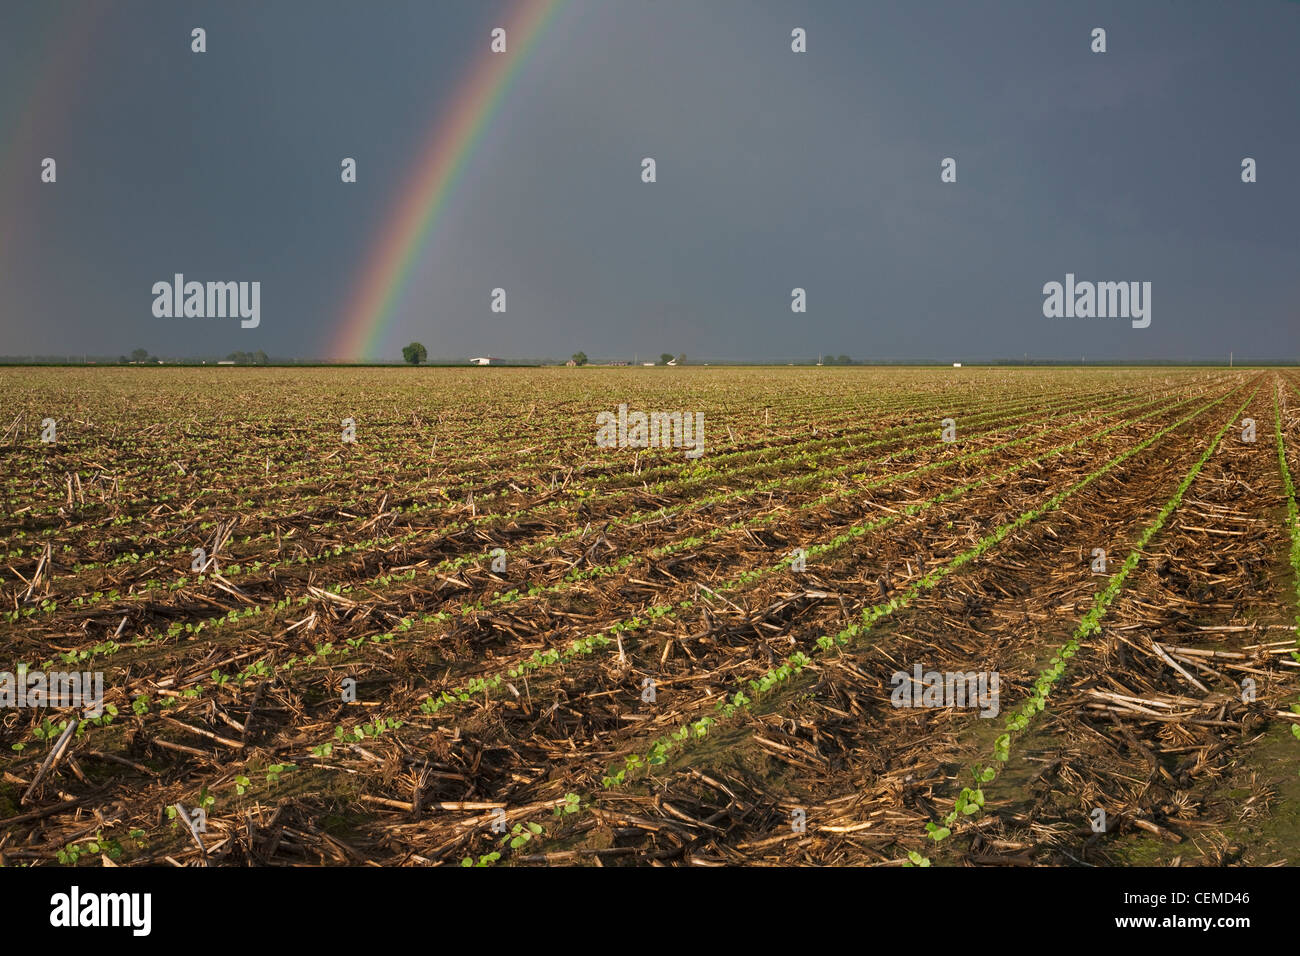 Agriculture - Field of cotton seedlings in mid Spring with a dark, stormy sky and rainbow in the background / Arkansas, USA. Stock Photo